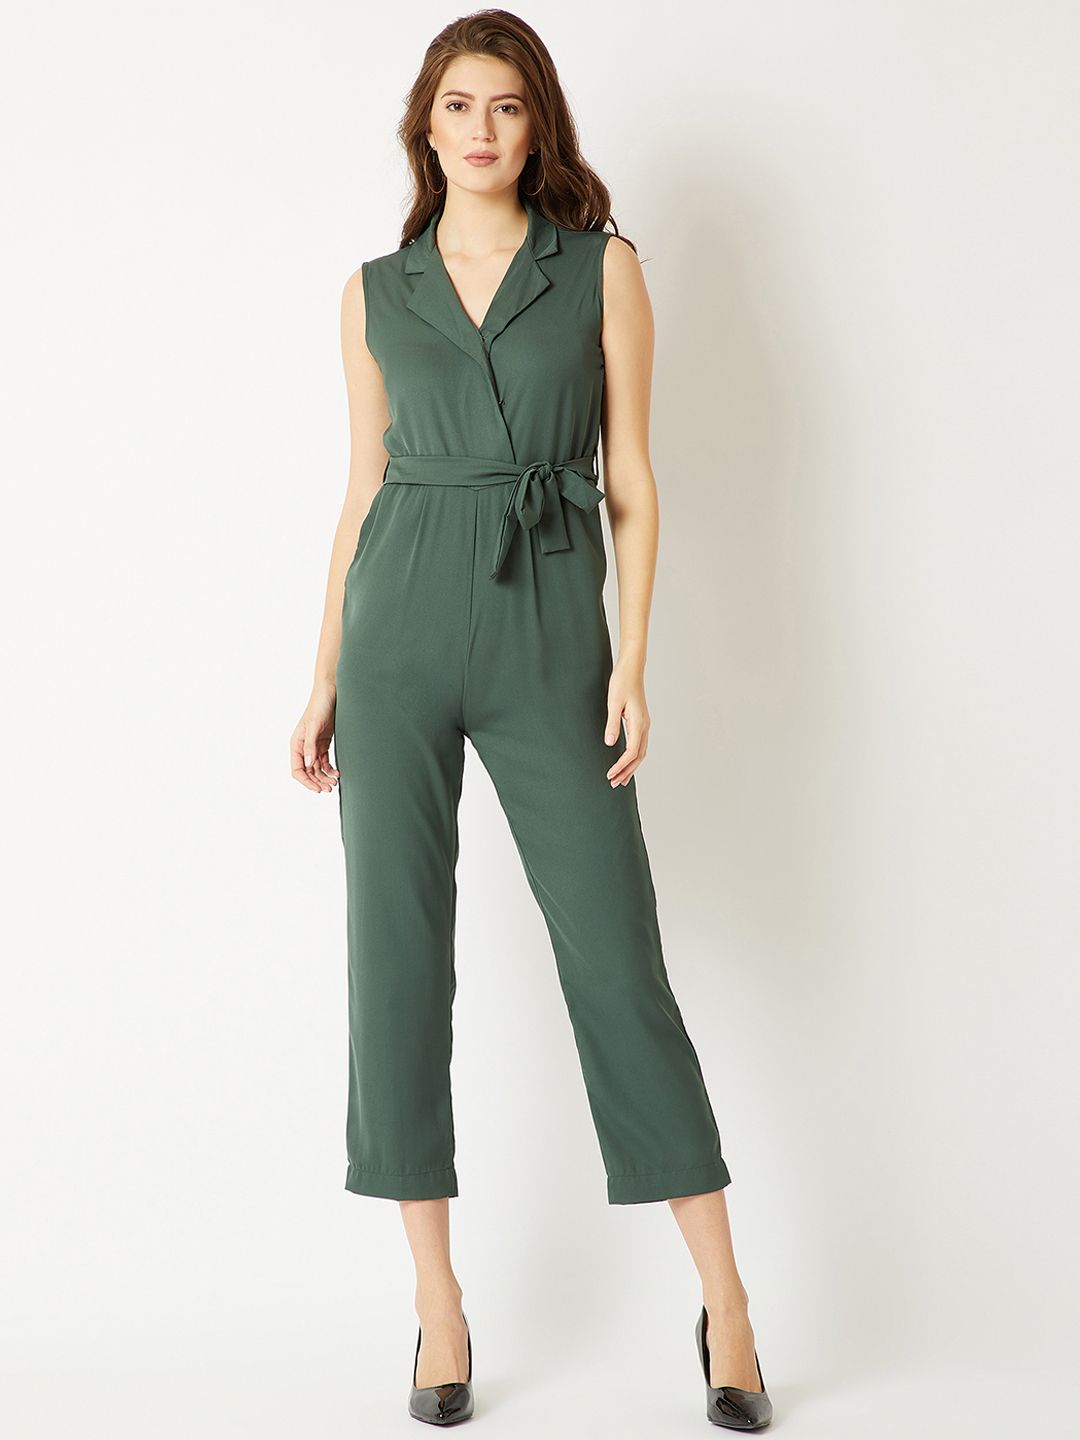 Miss Chase Green Solid Basic Jumpsuit Price in India